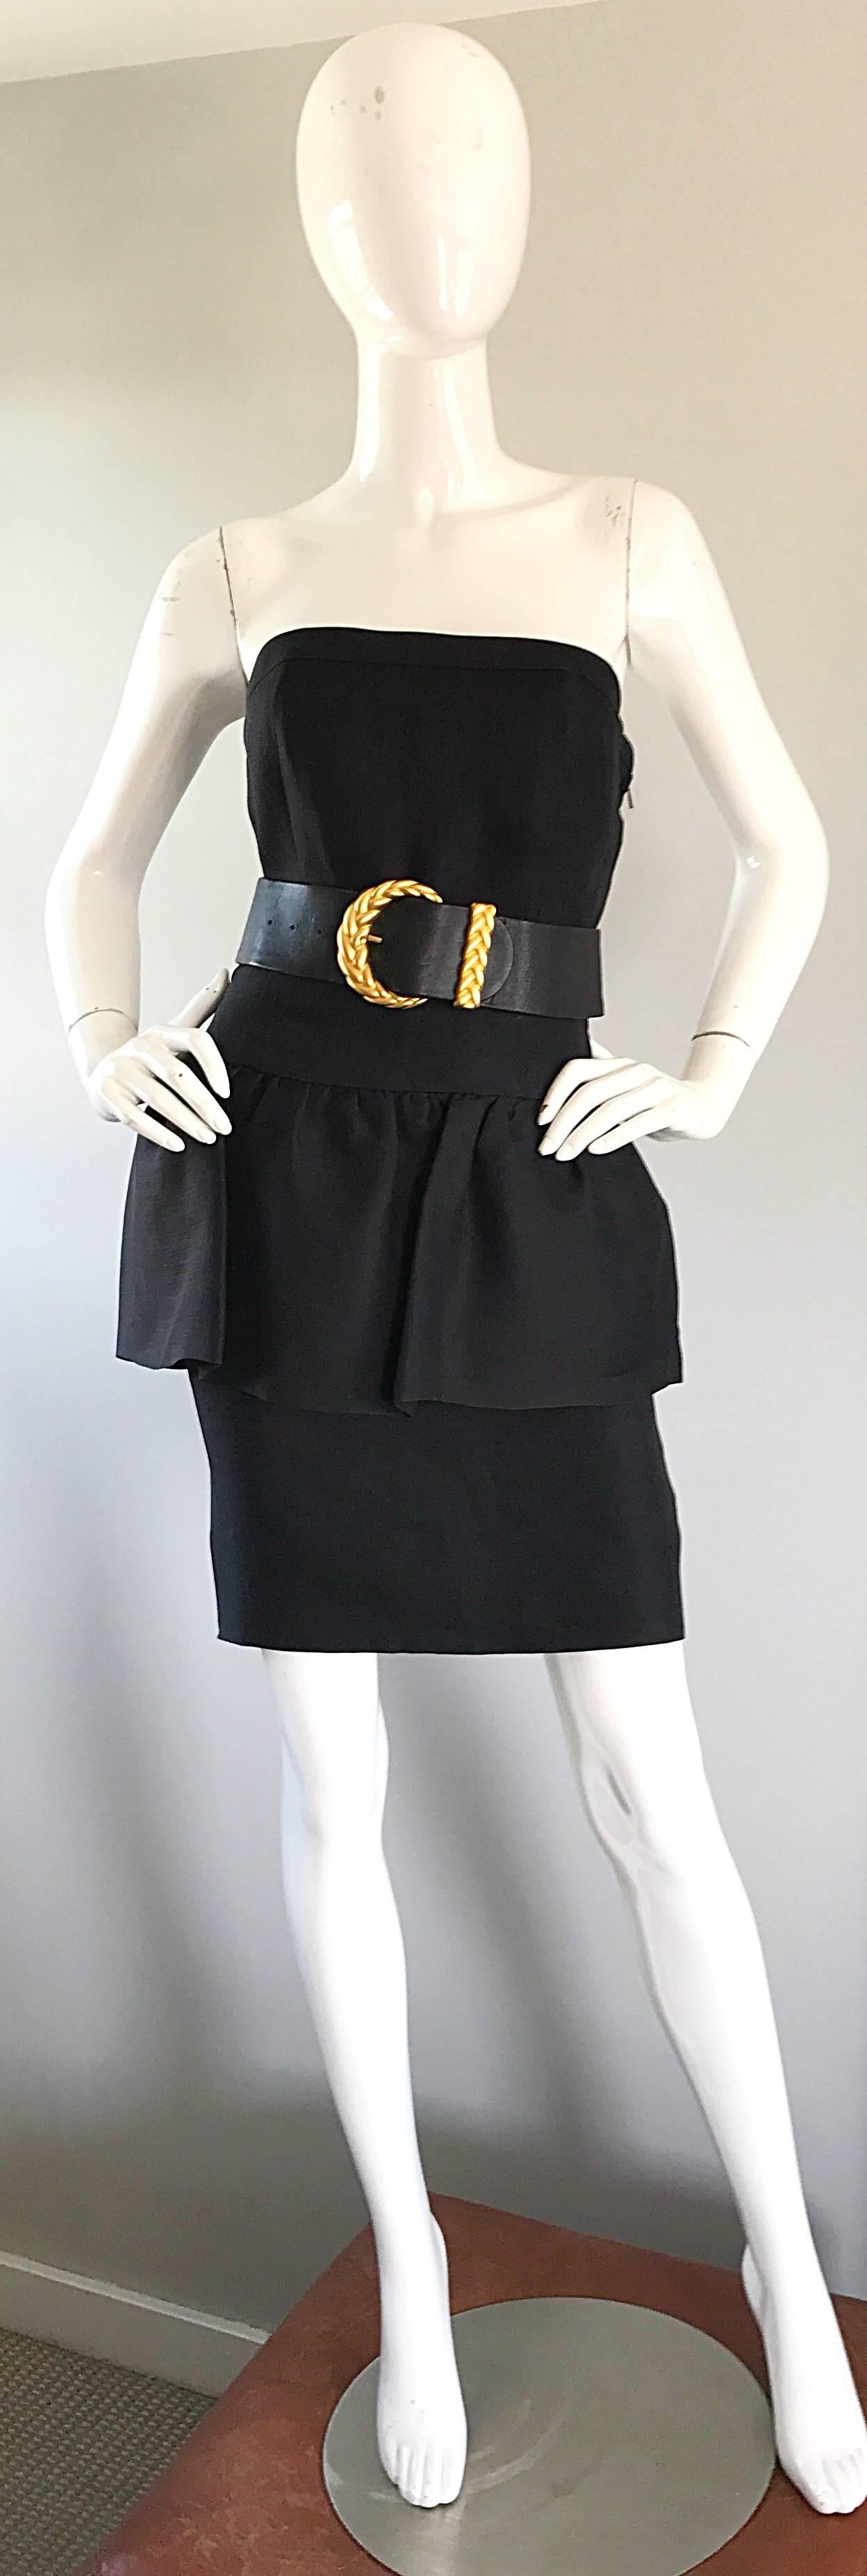 Yves Saint Laurent Rive Gauche 1980s Vintage Black Strapless Peplum Dress In Excellent Condition For Sale In San Diego, CA